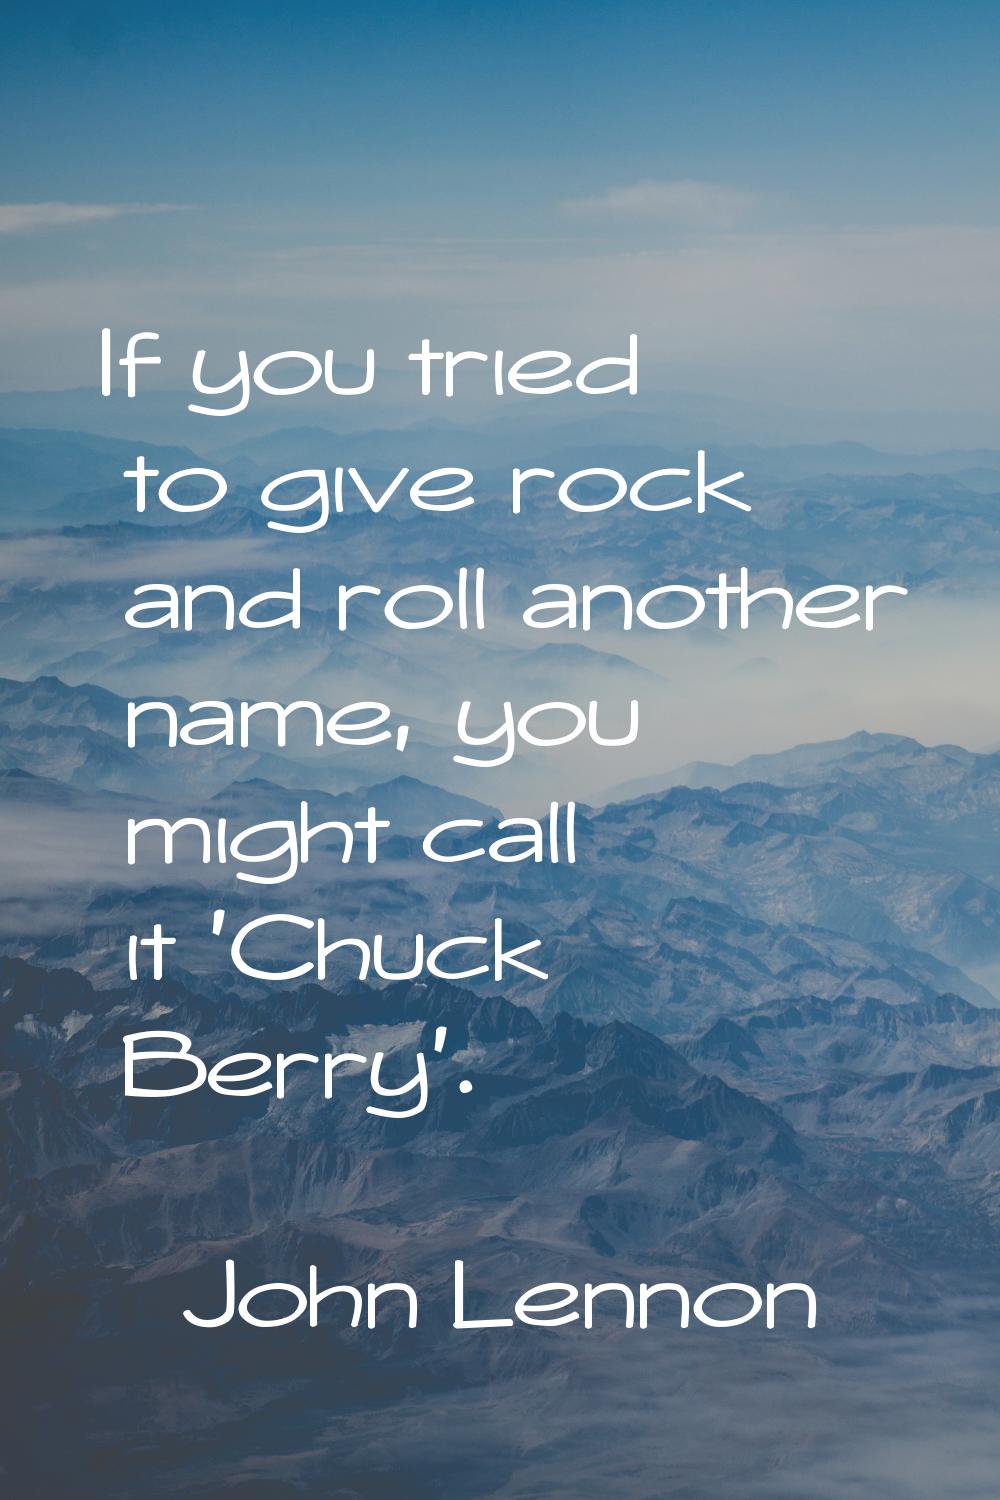 If you tried to give rock and roll another name, you might call it 'Chuck Berry'.